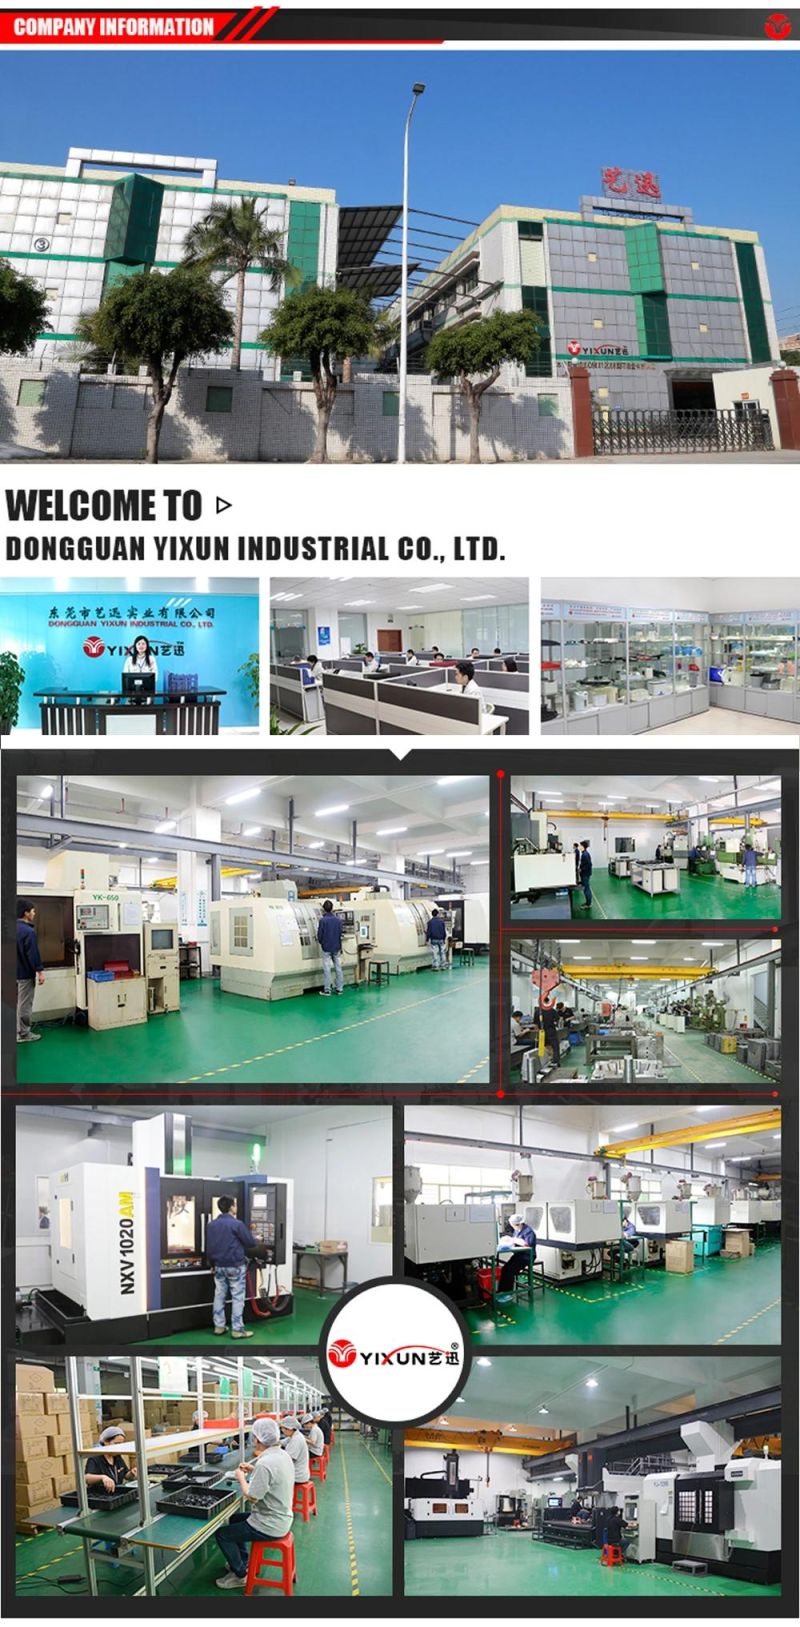 Dongguan Mold Maker Plastic Injection Mold Specilizing in Plastic Open Mold Injection Processing Products Assembly Manufacture